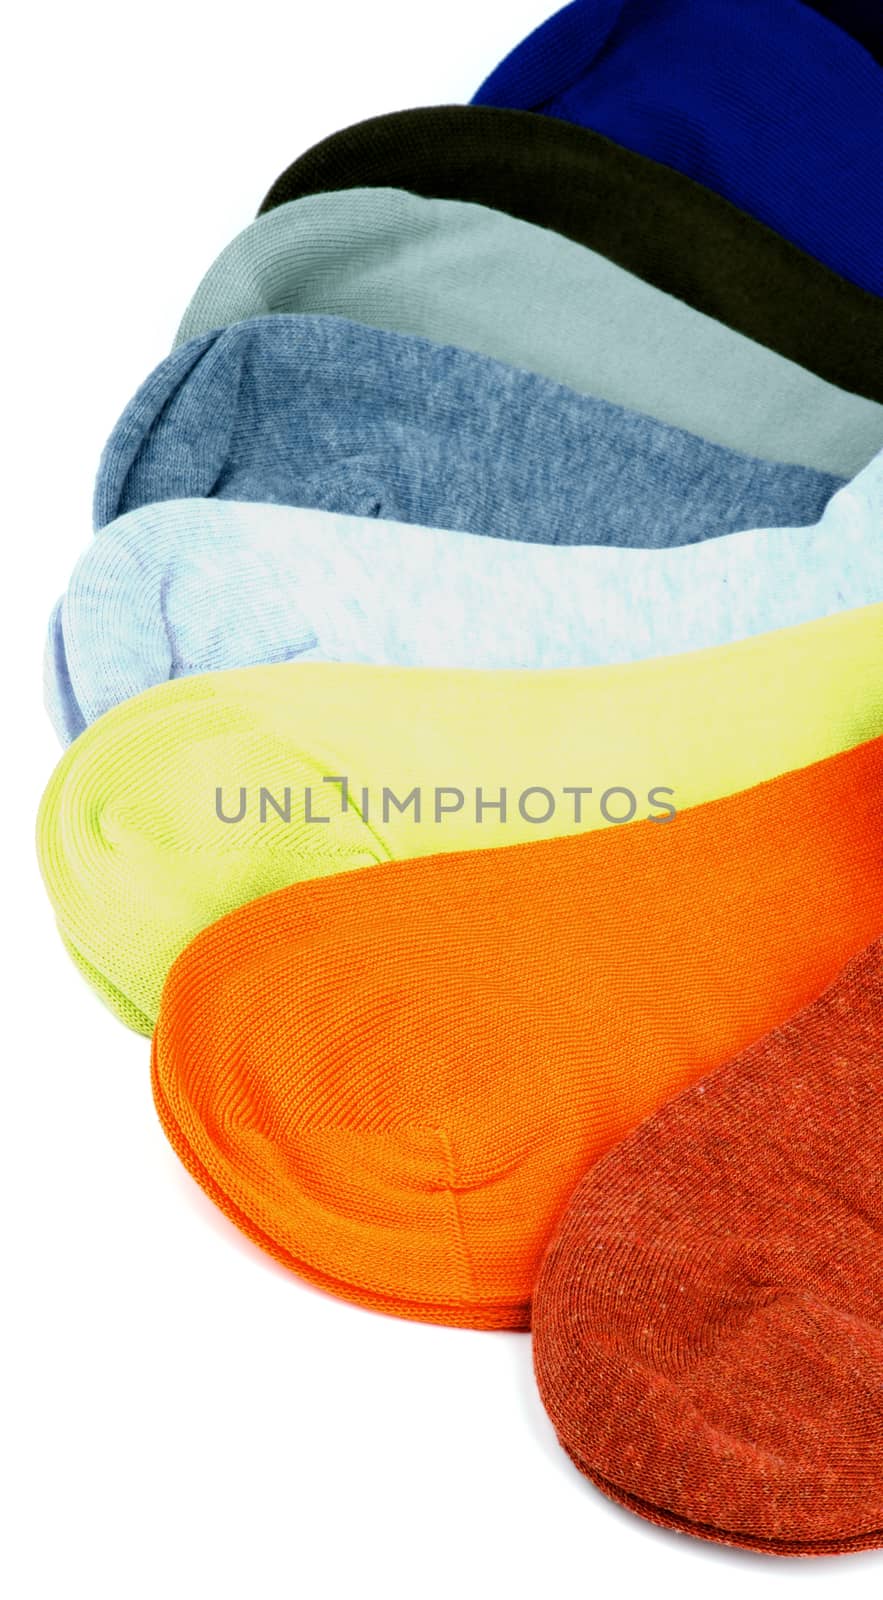 Fan Shaped of Colored Cotton Socks isolated on white background